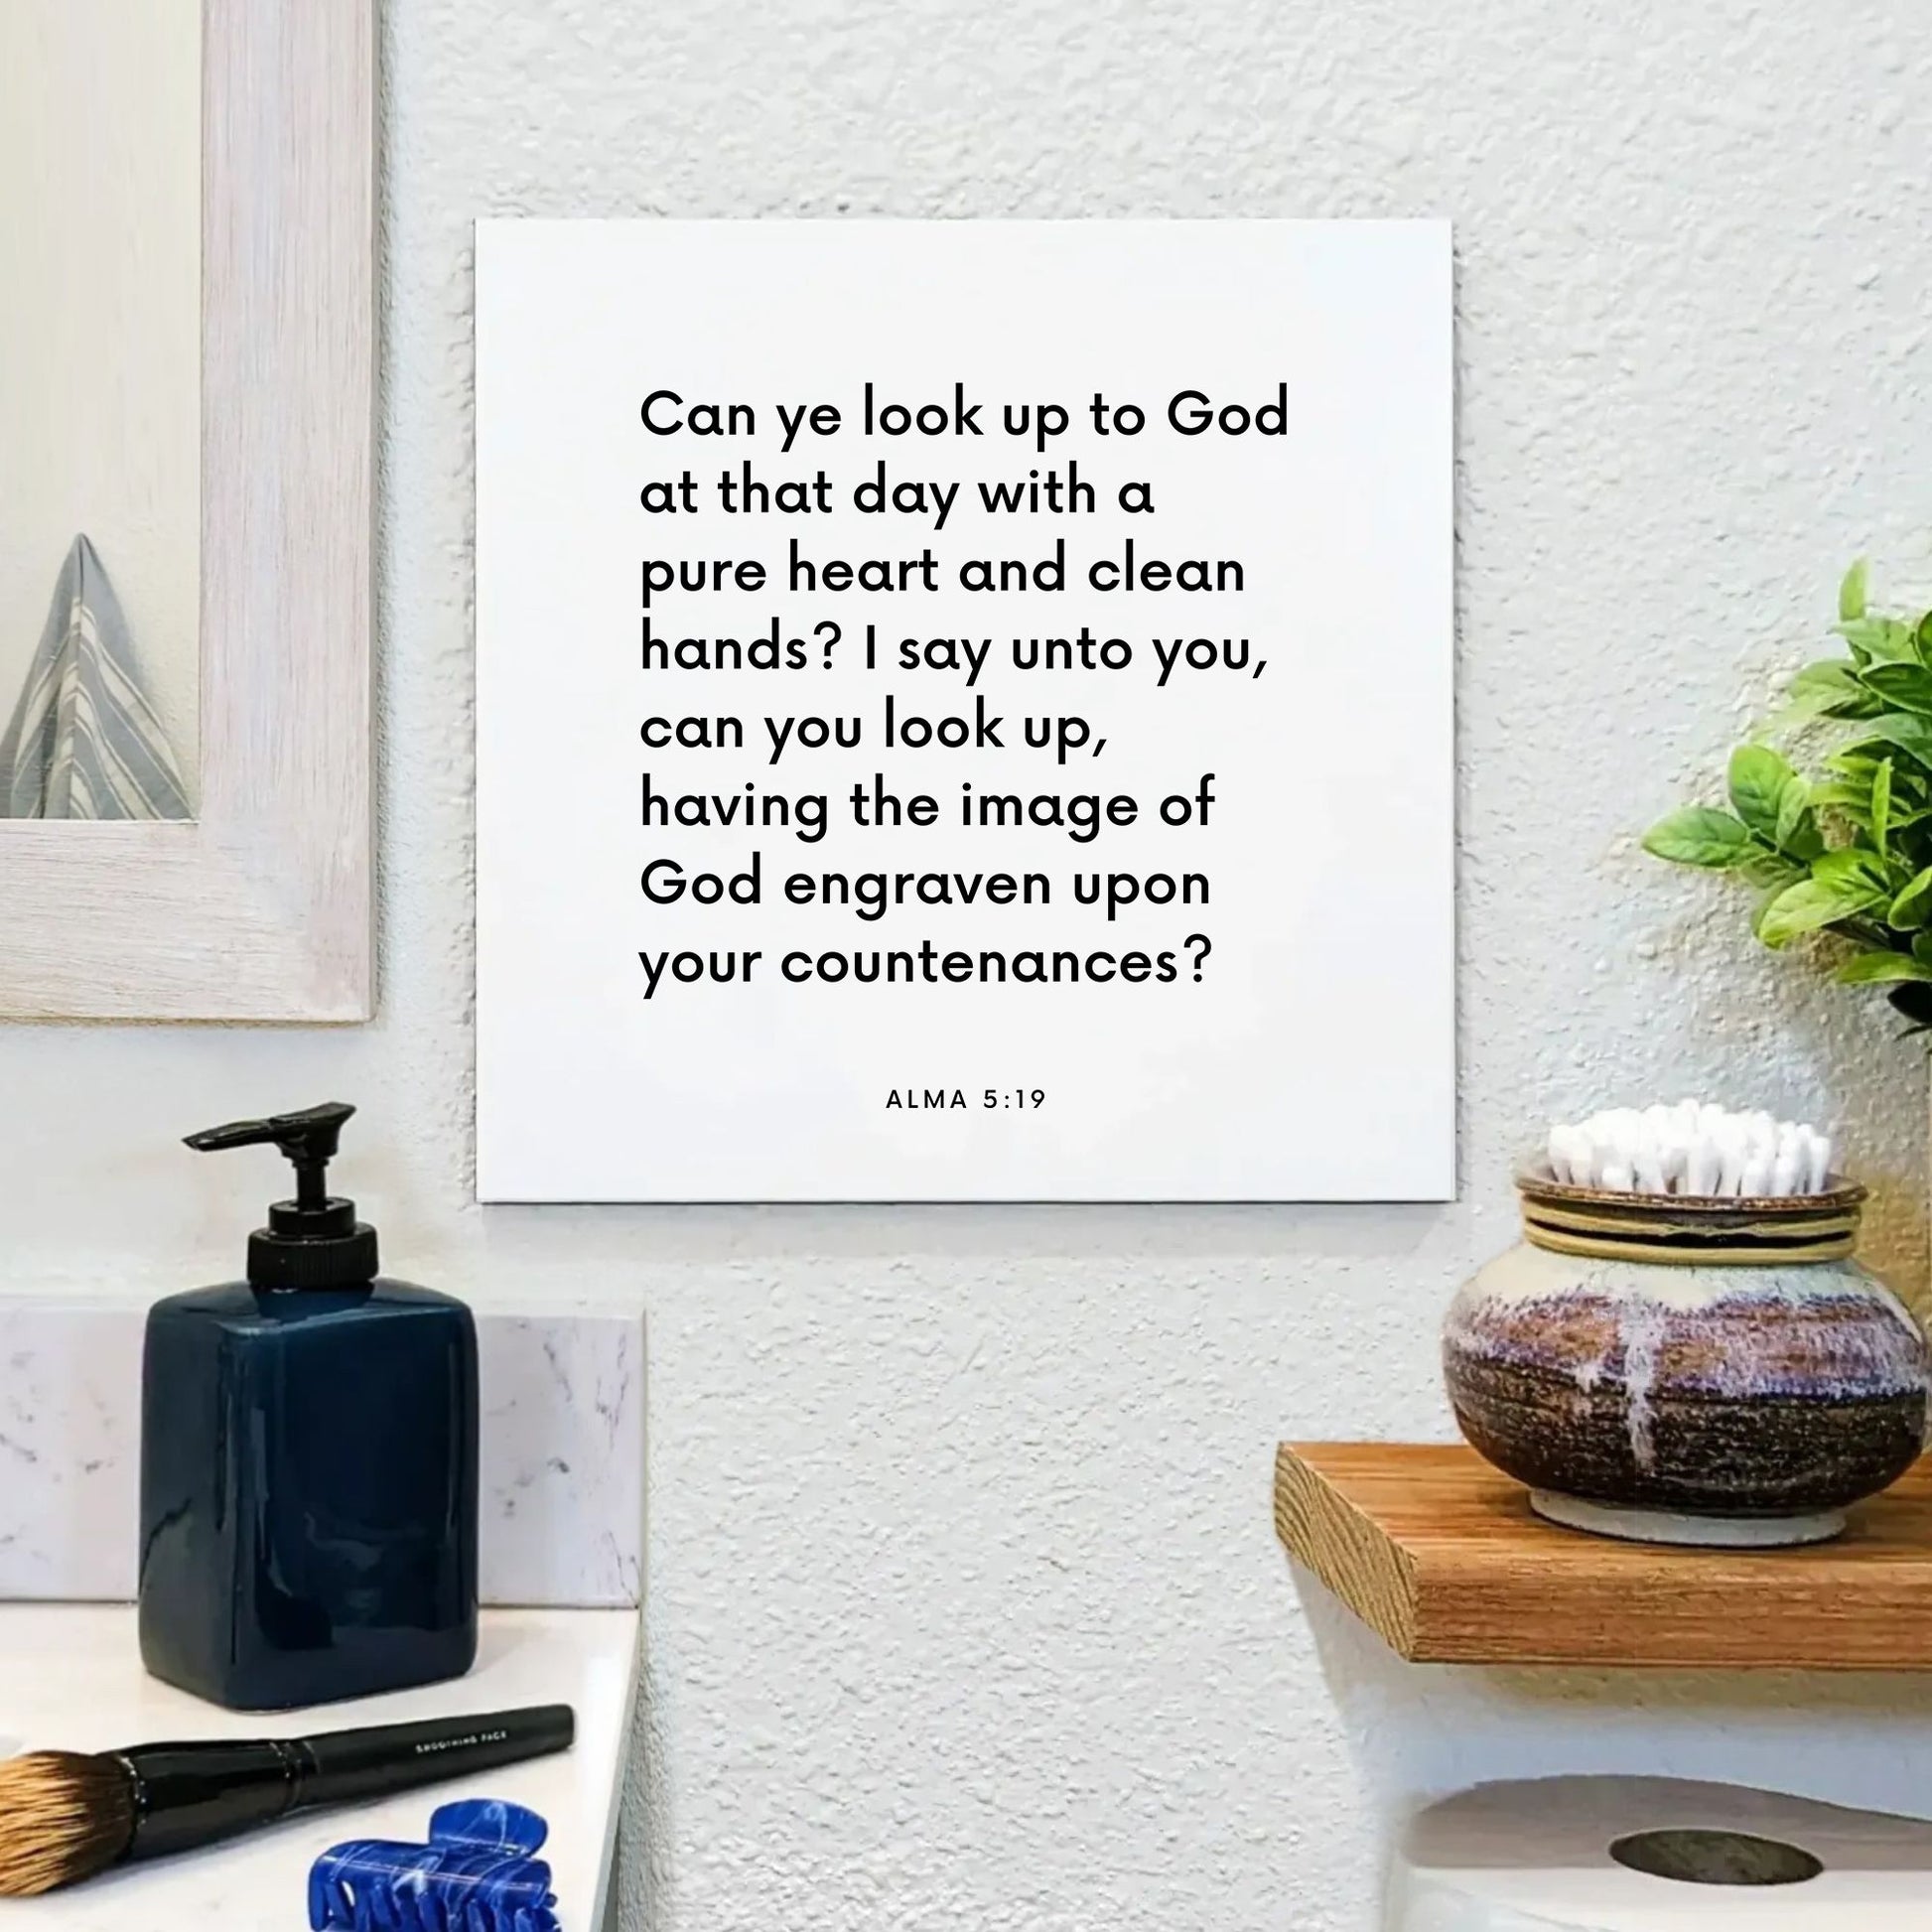 Bathroom mouting of the scripture tile for Alma 5:19 - "The image of God engraven upon your countenances"